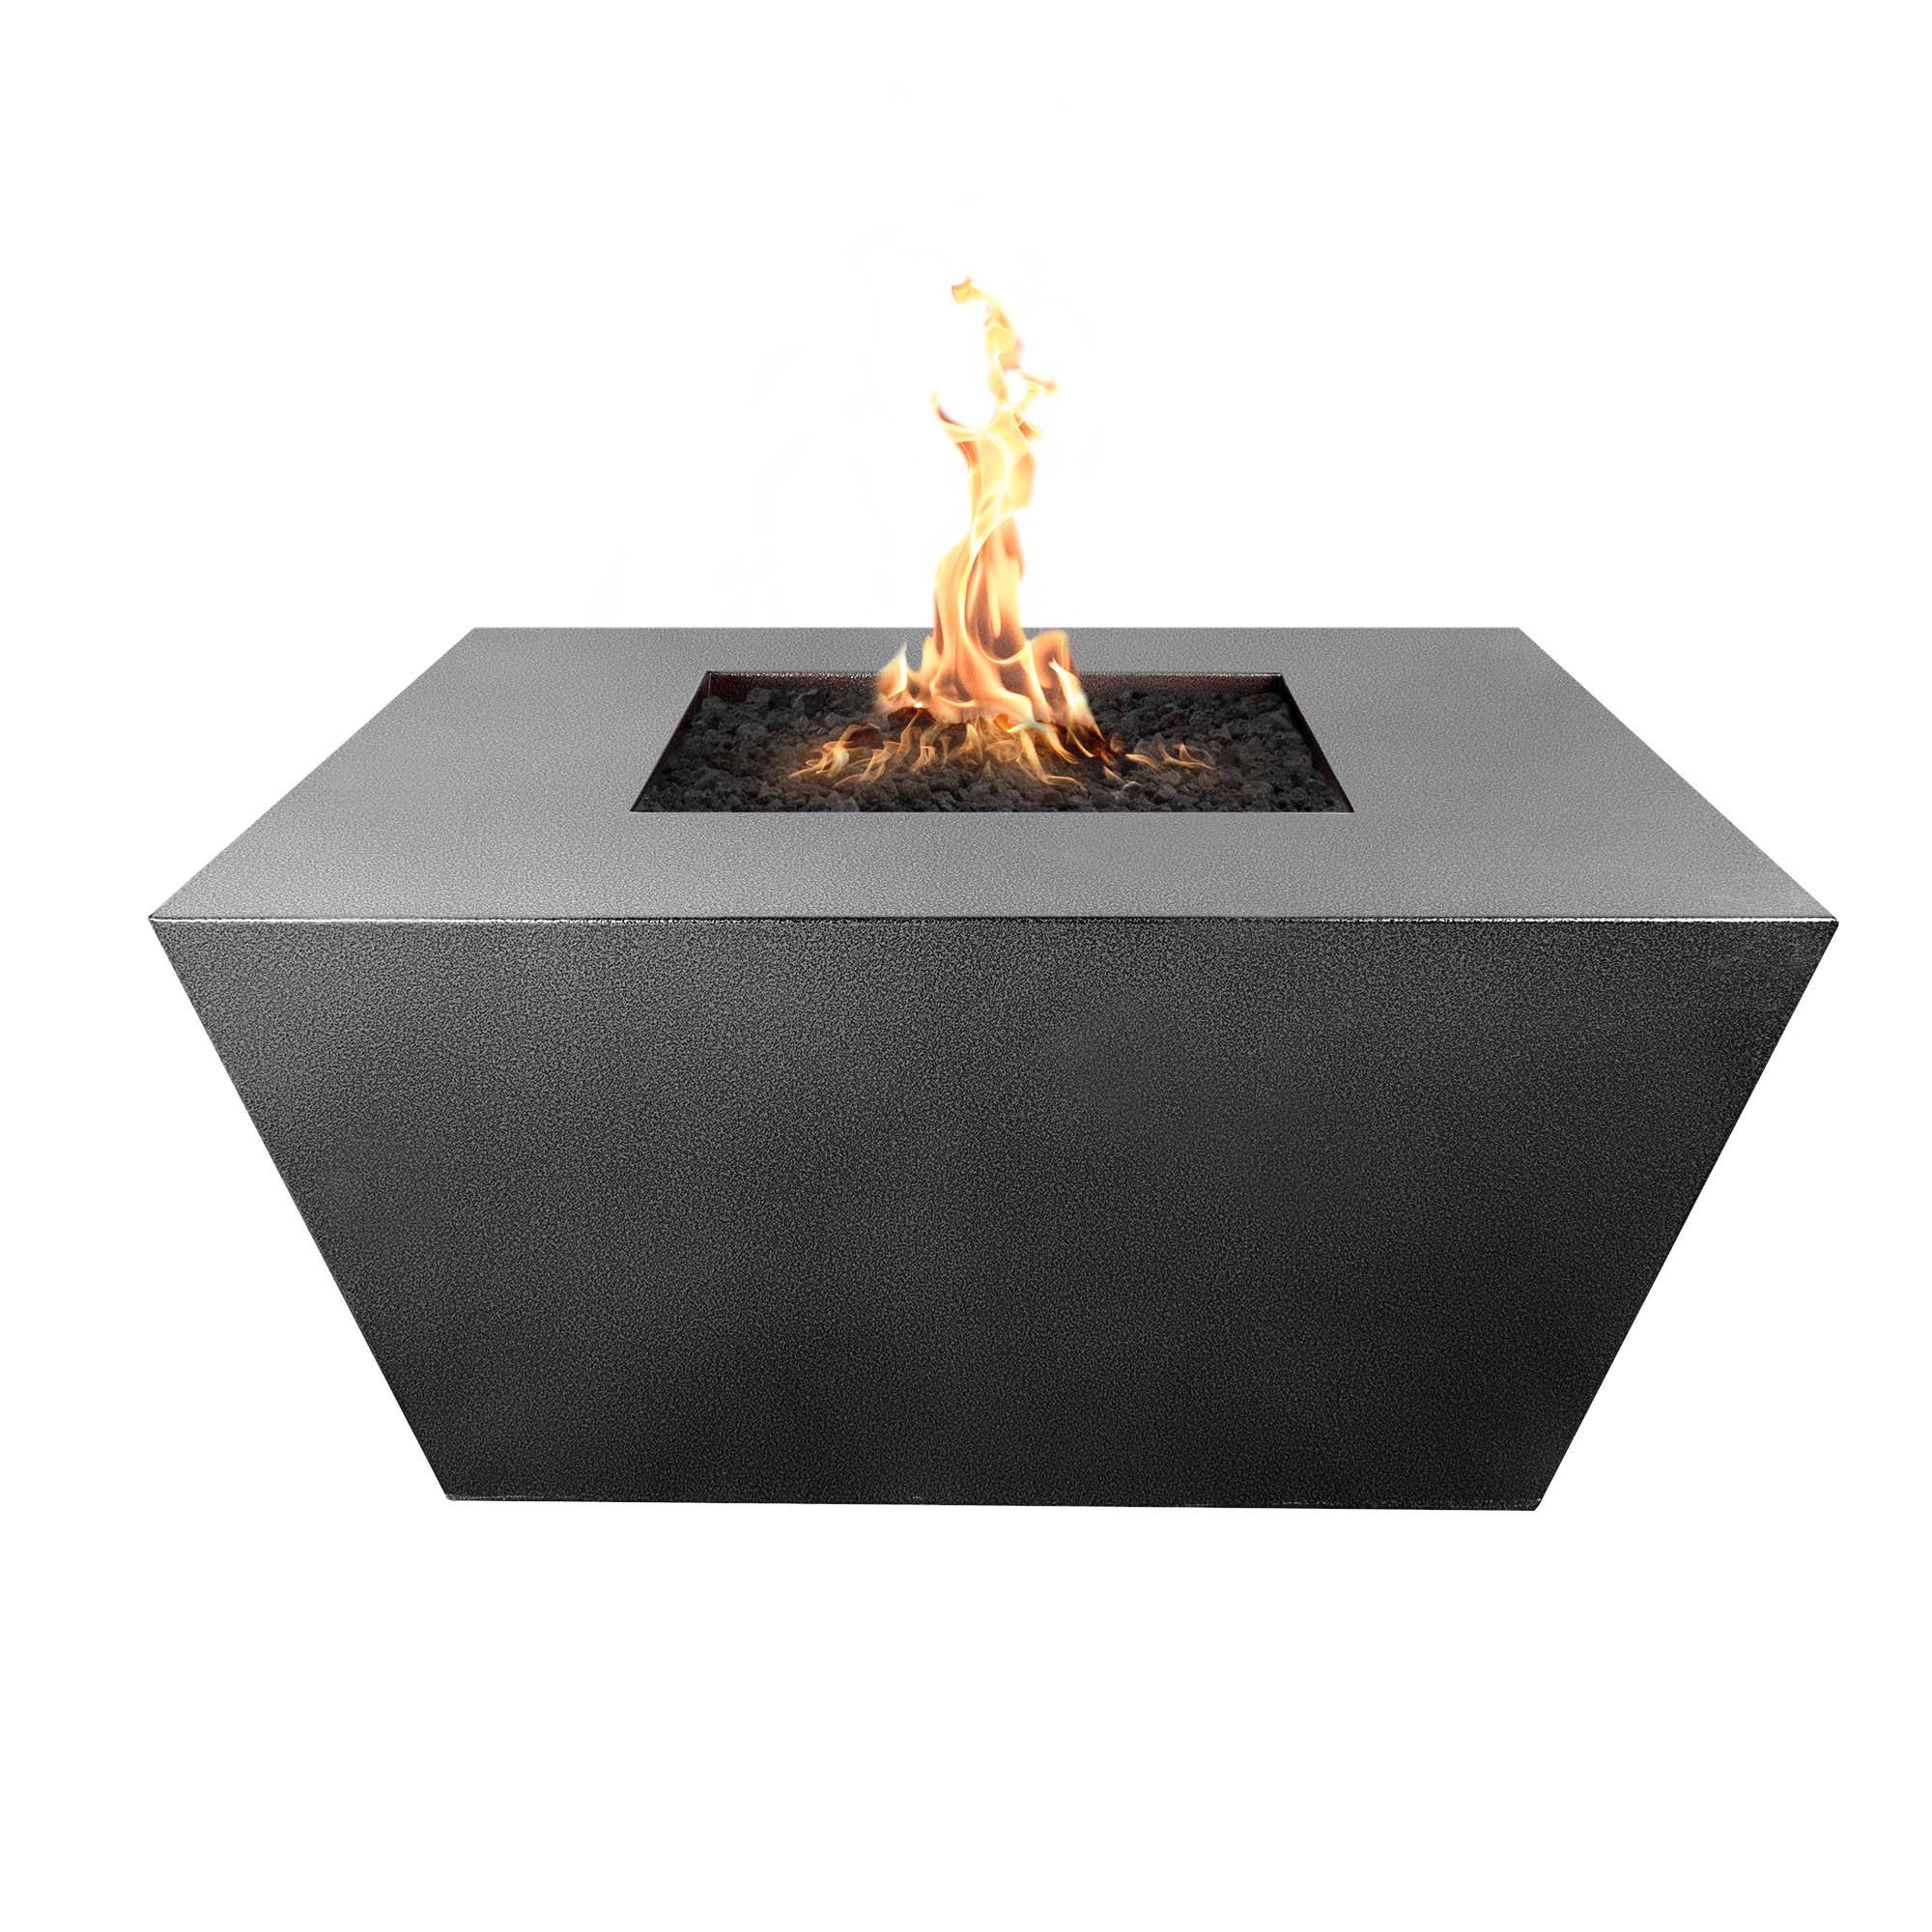 The Outdoor Plus Redan Fire Pit Stainless Steel OPT-SQXXSS - Serenity Provision